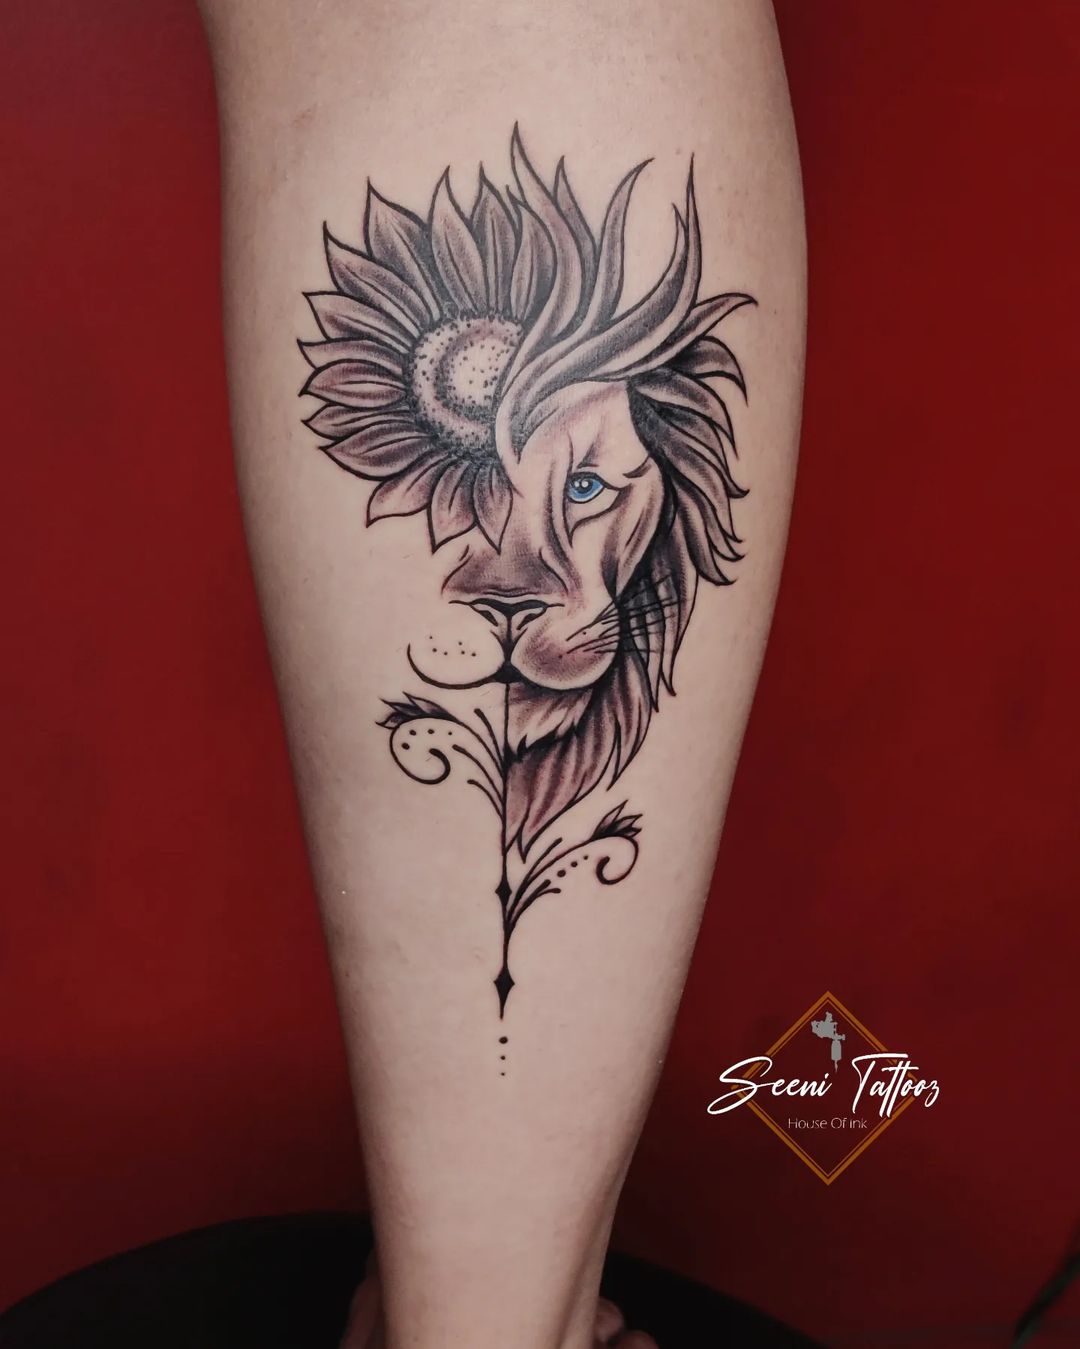 Healed lion and sunflowers done by Hooka at Liquid Amber Tattoos in  Vancouver BC  rtattoos